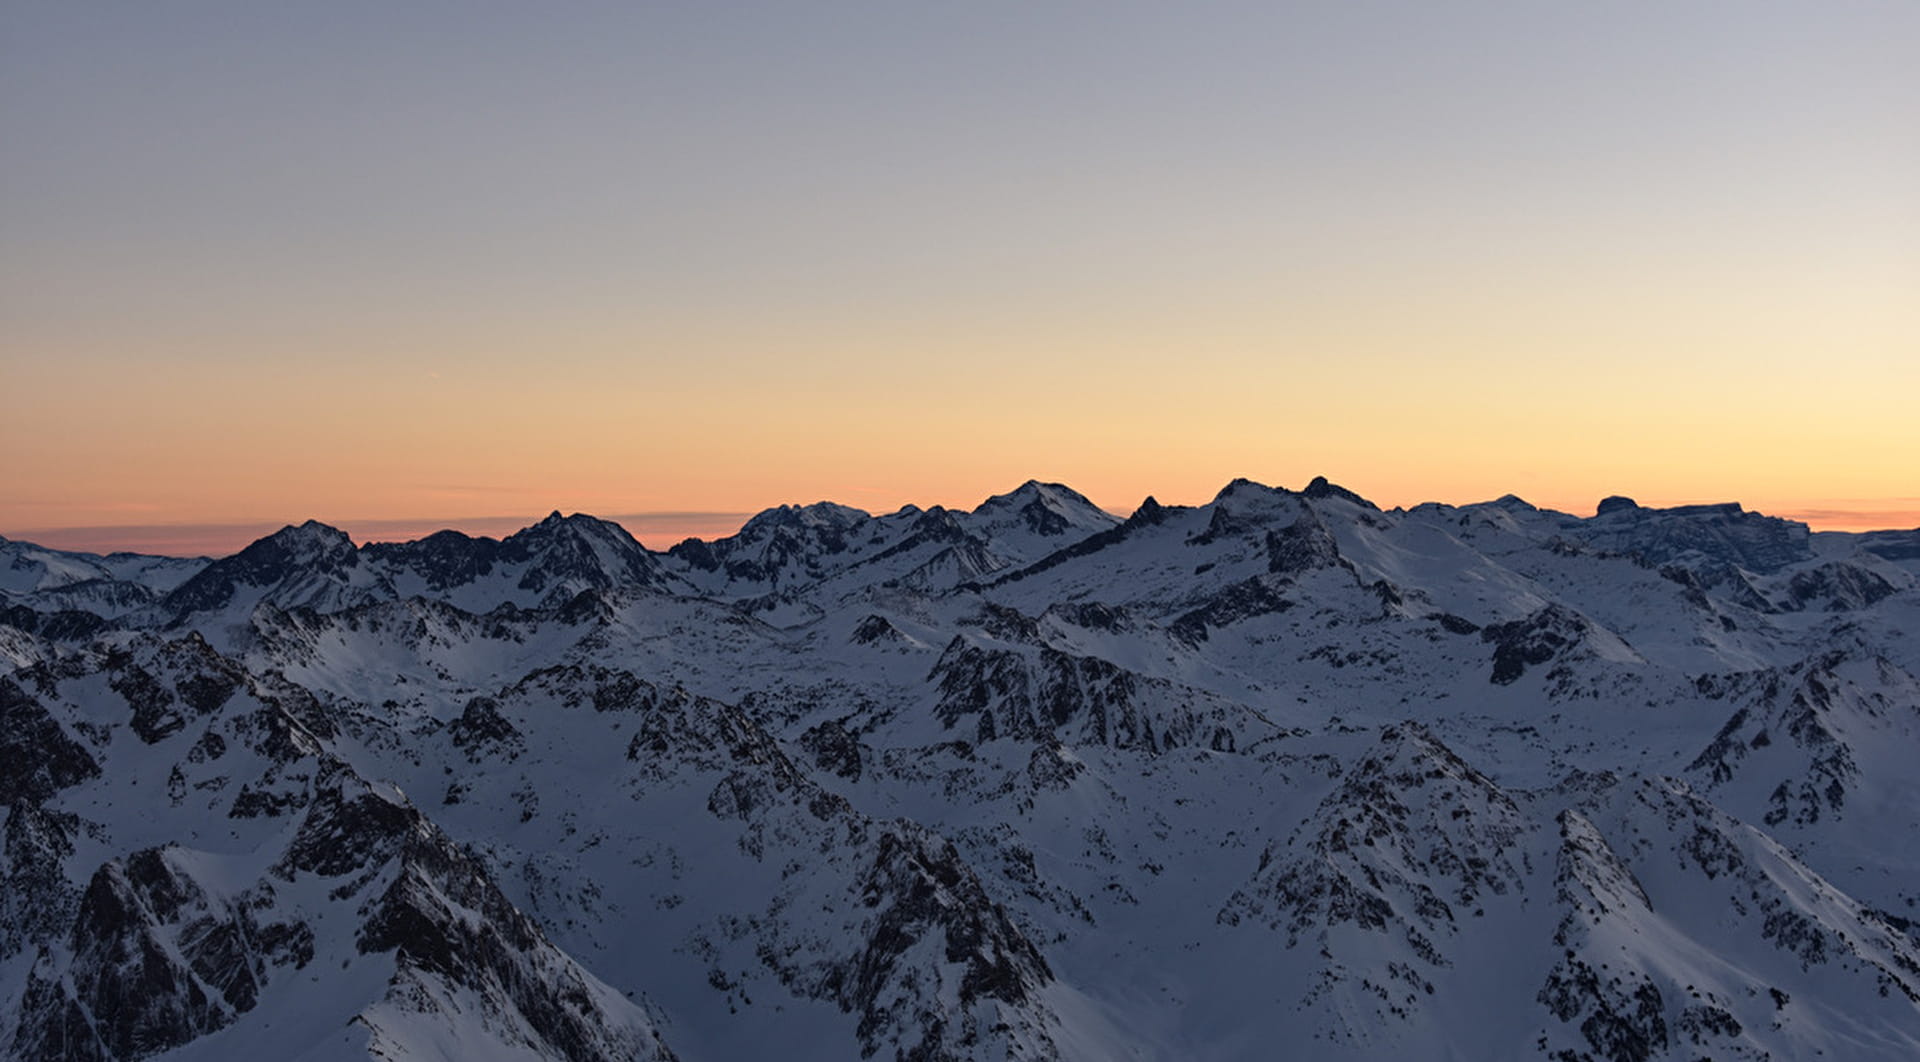 Sunset over the Pyrenees from the Pic du Midi